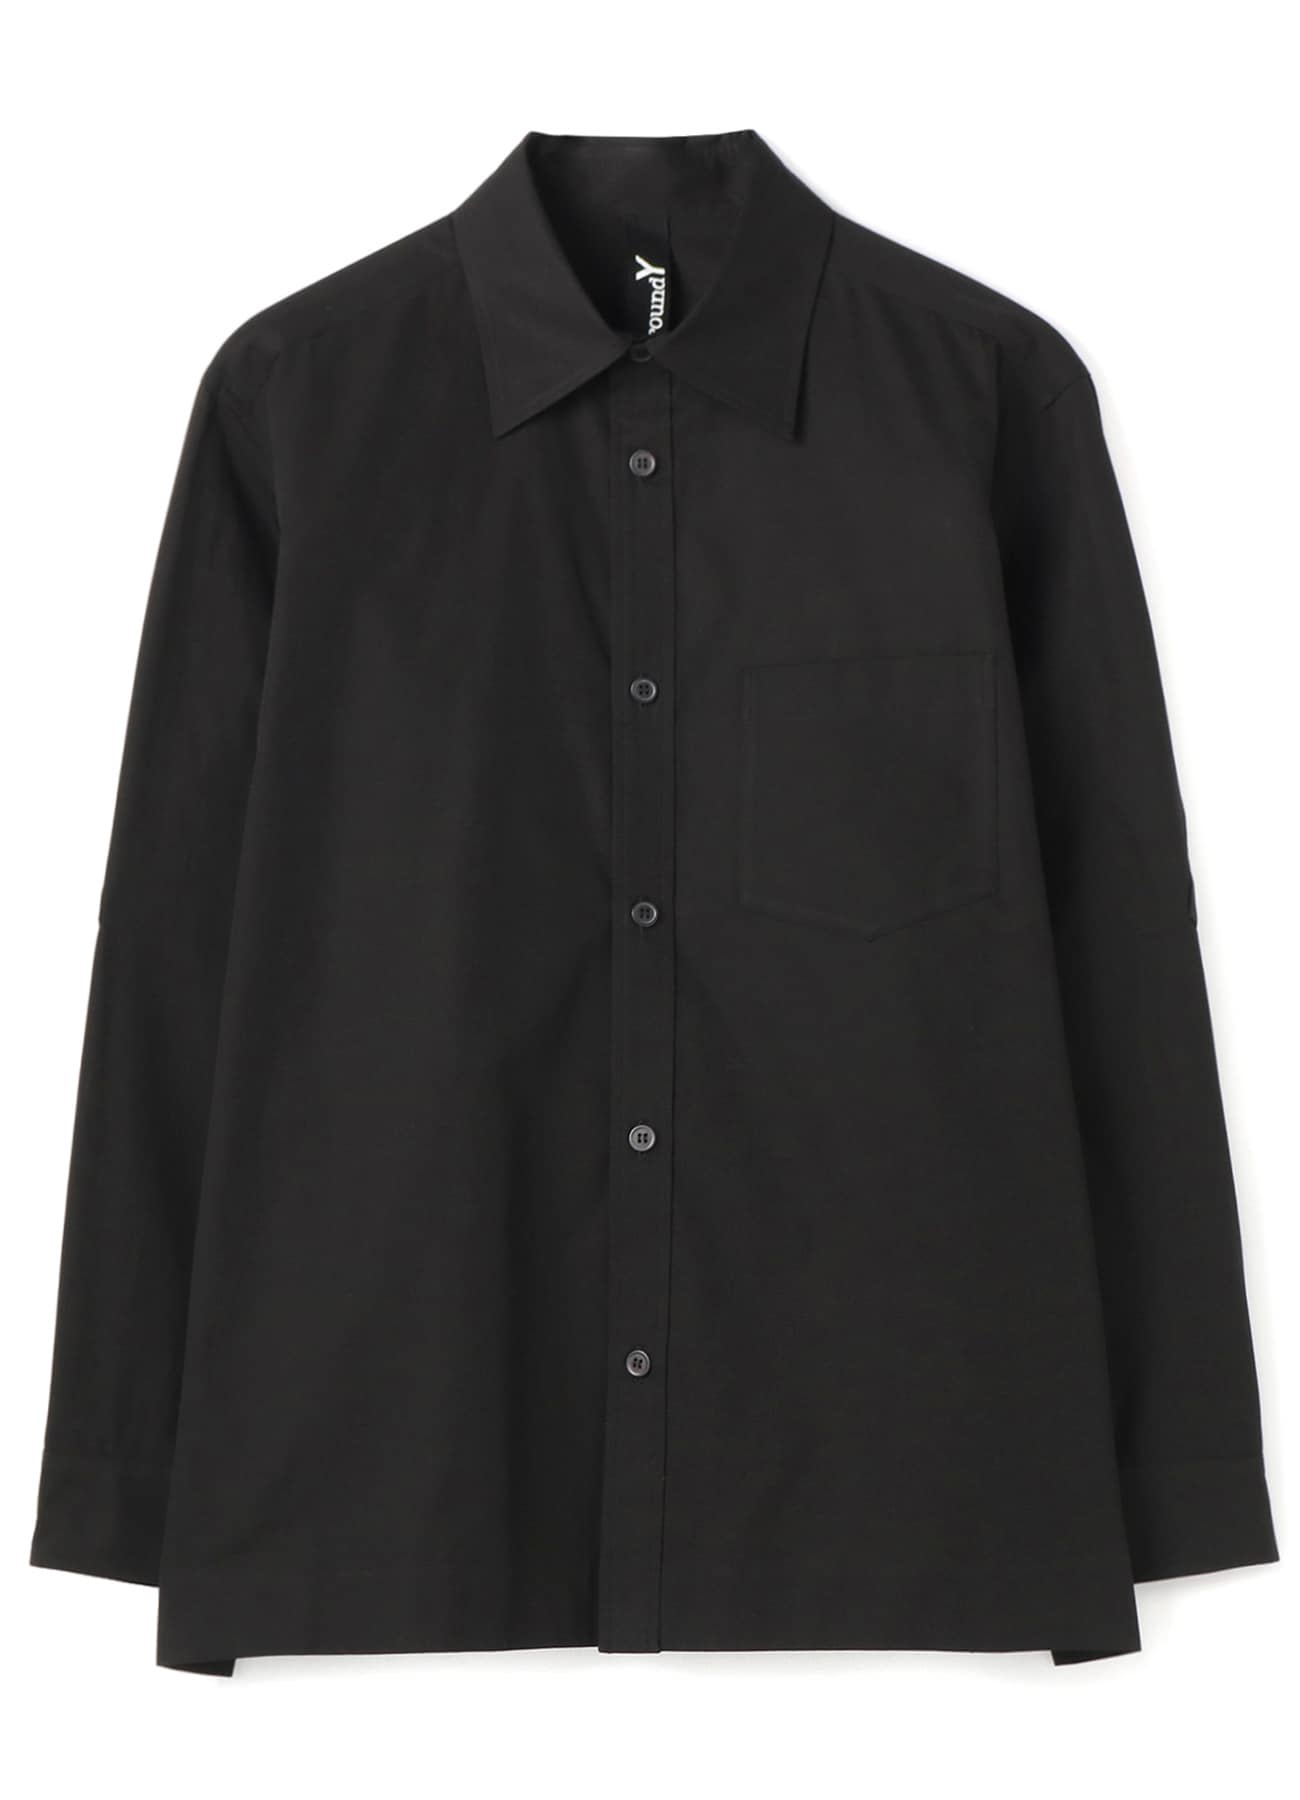 100/2 cotton broad Back button opened shirt